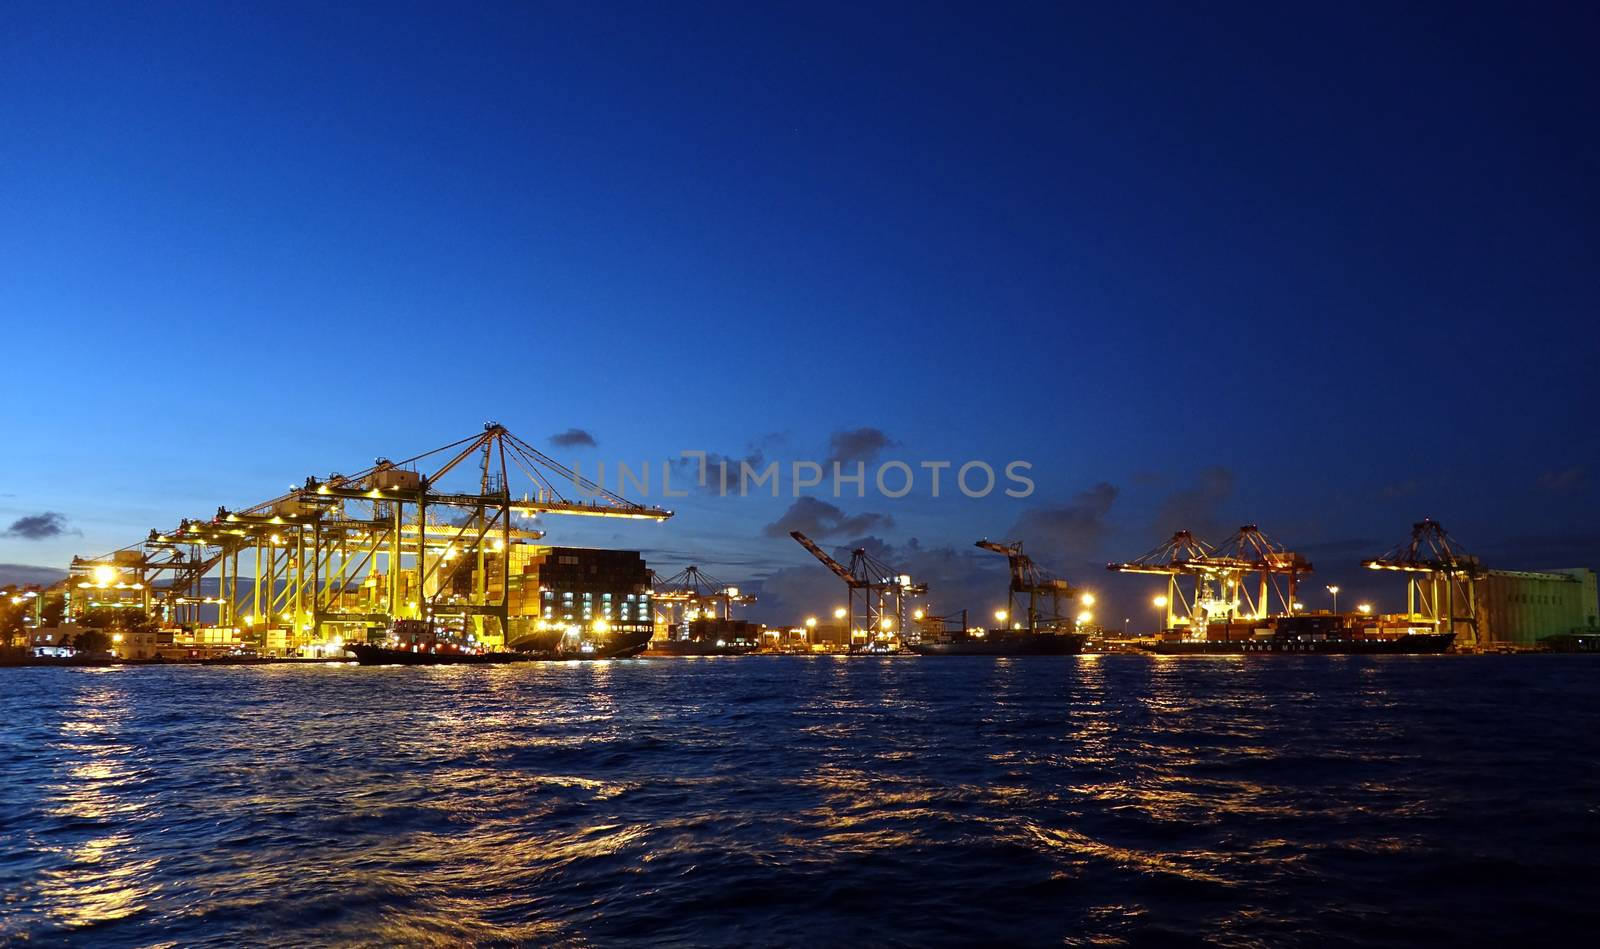 KAOHSIUNG, TAIWAN -- JUNE 2, 2019: Containers are being loaded onto ships in Kaohsiung Port at dusk